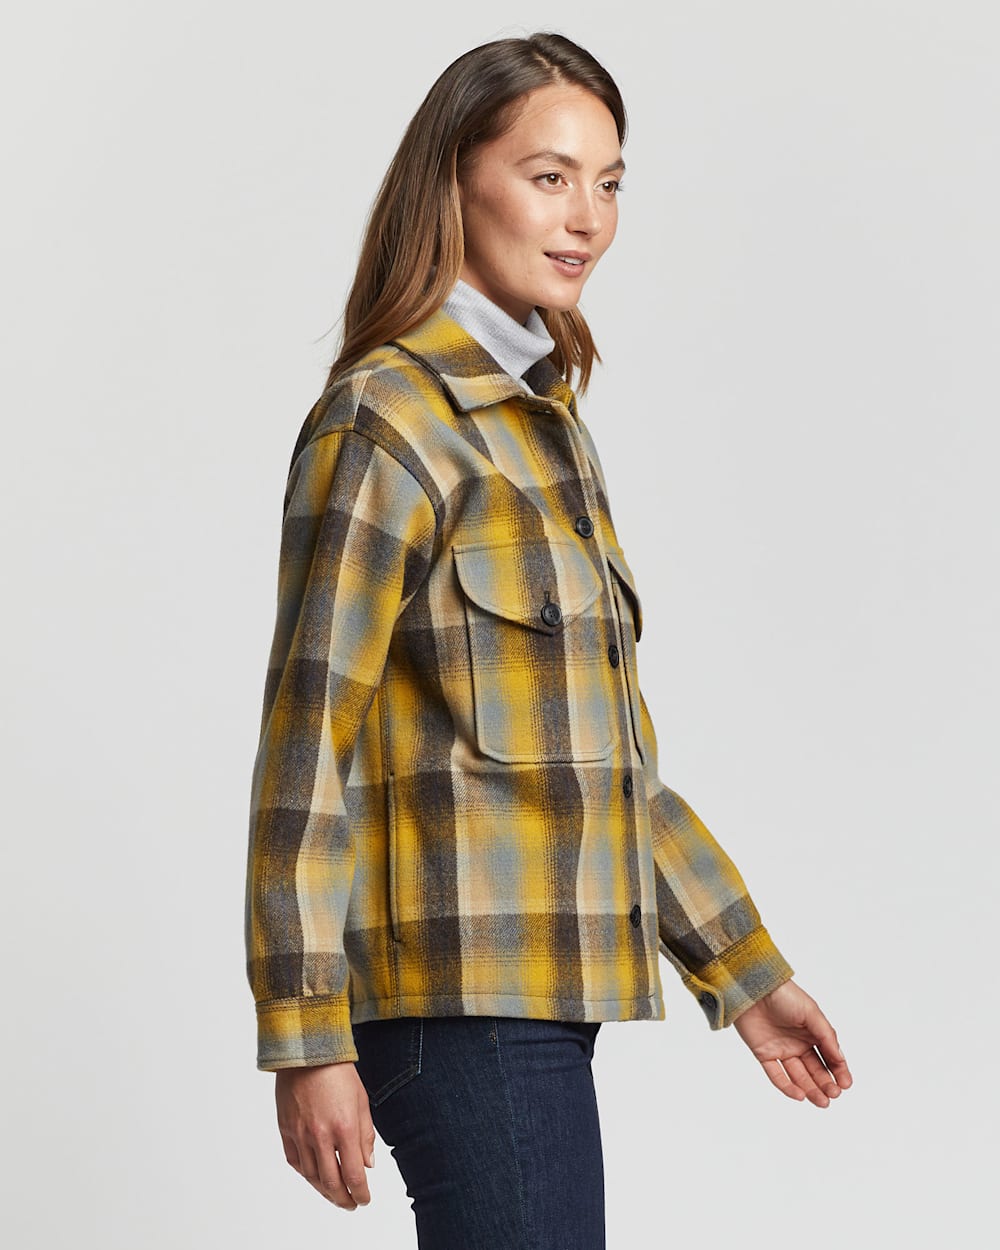 ALTERNATE VIEW OF WOMEN'S DYLAN WOOL JACKET IN YELLOW/NAVY PLAID image number 2